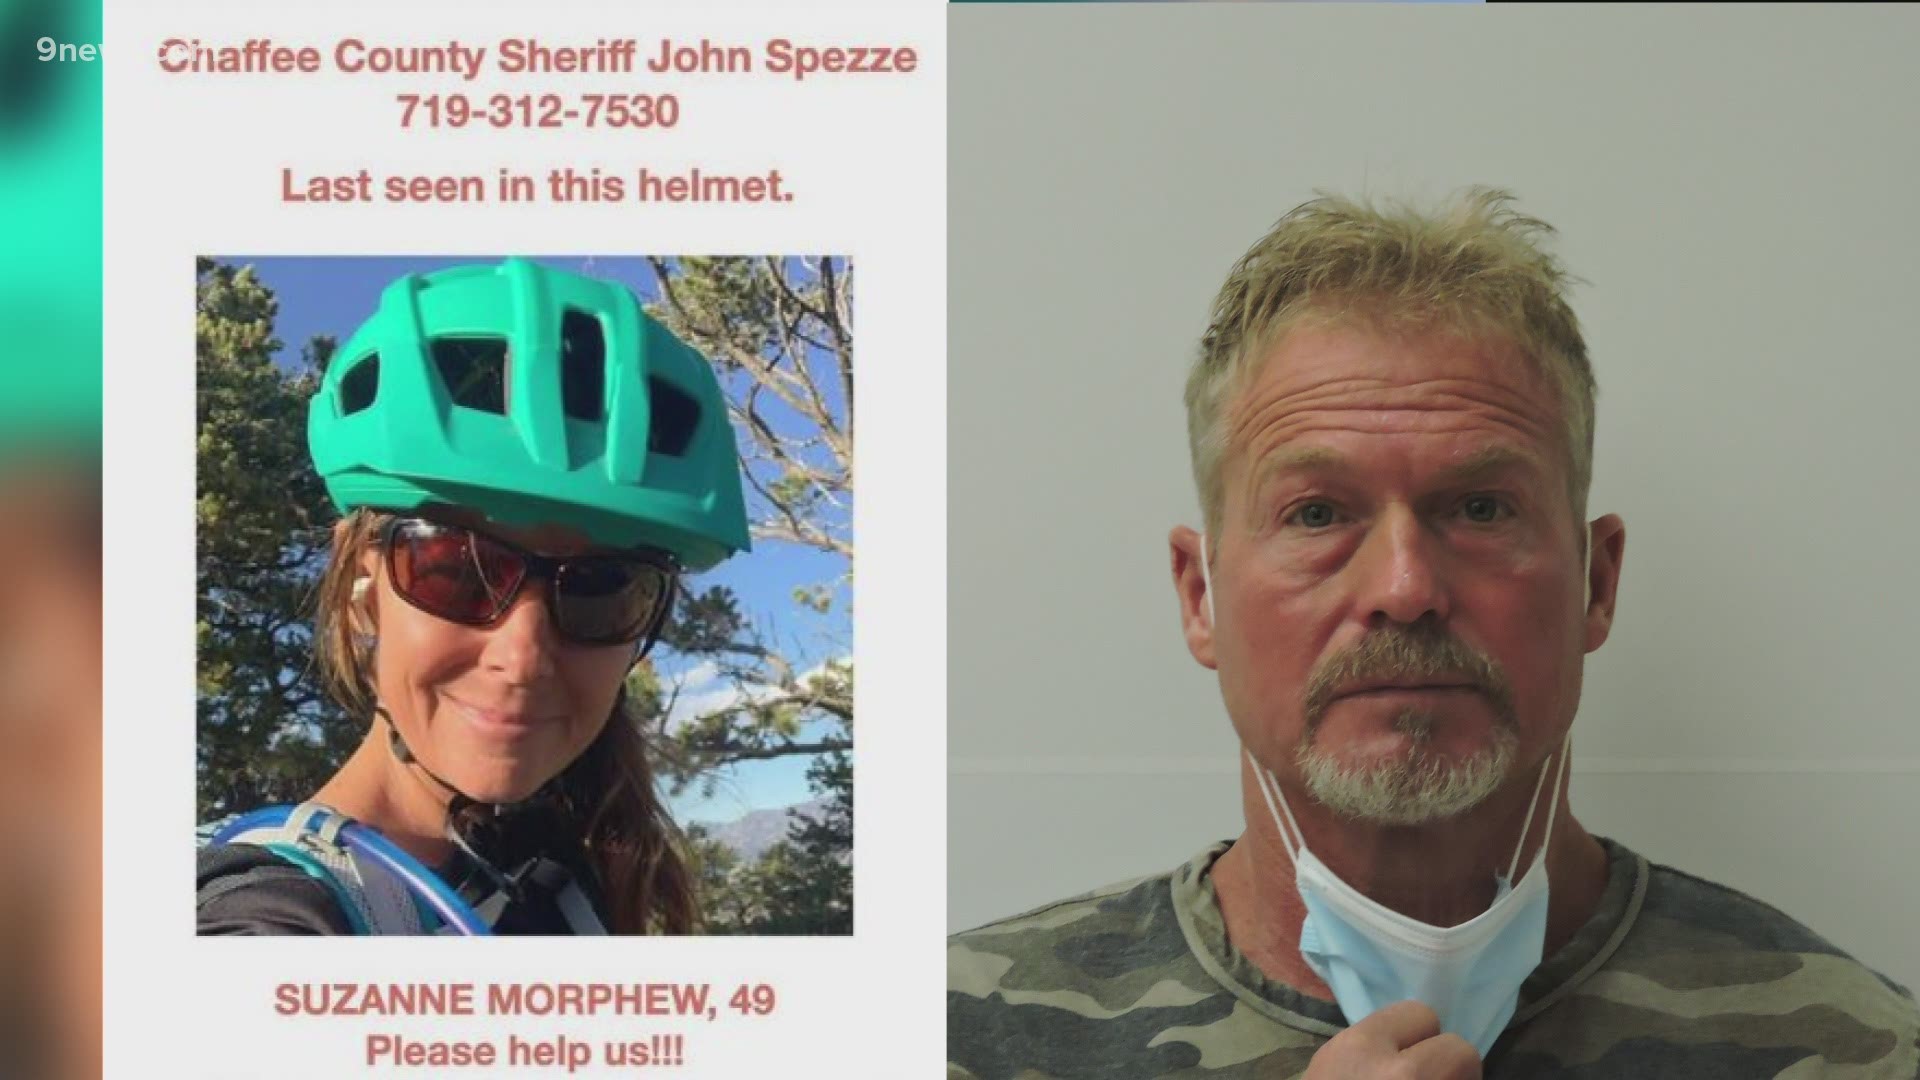 Suzanne Morphew, 49, was last seen on Mother's Day weekend of 2020 near her Chaffee County home.